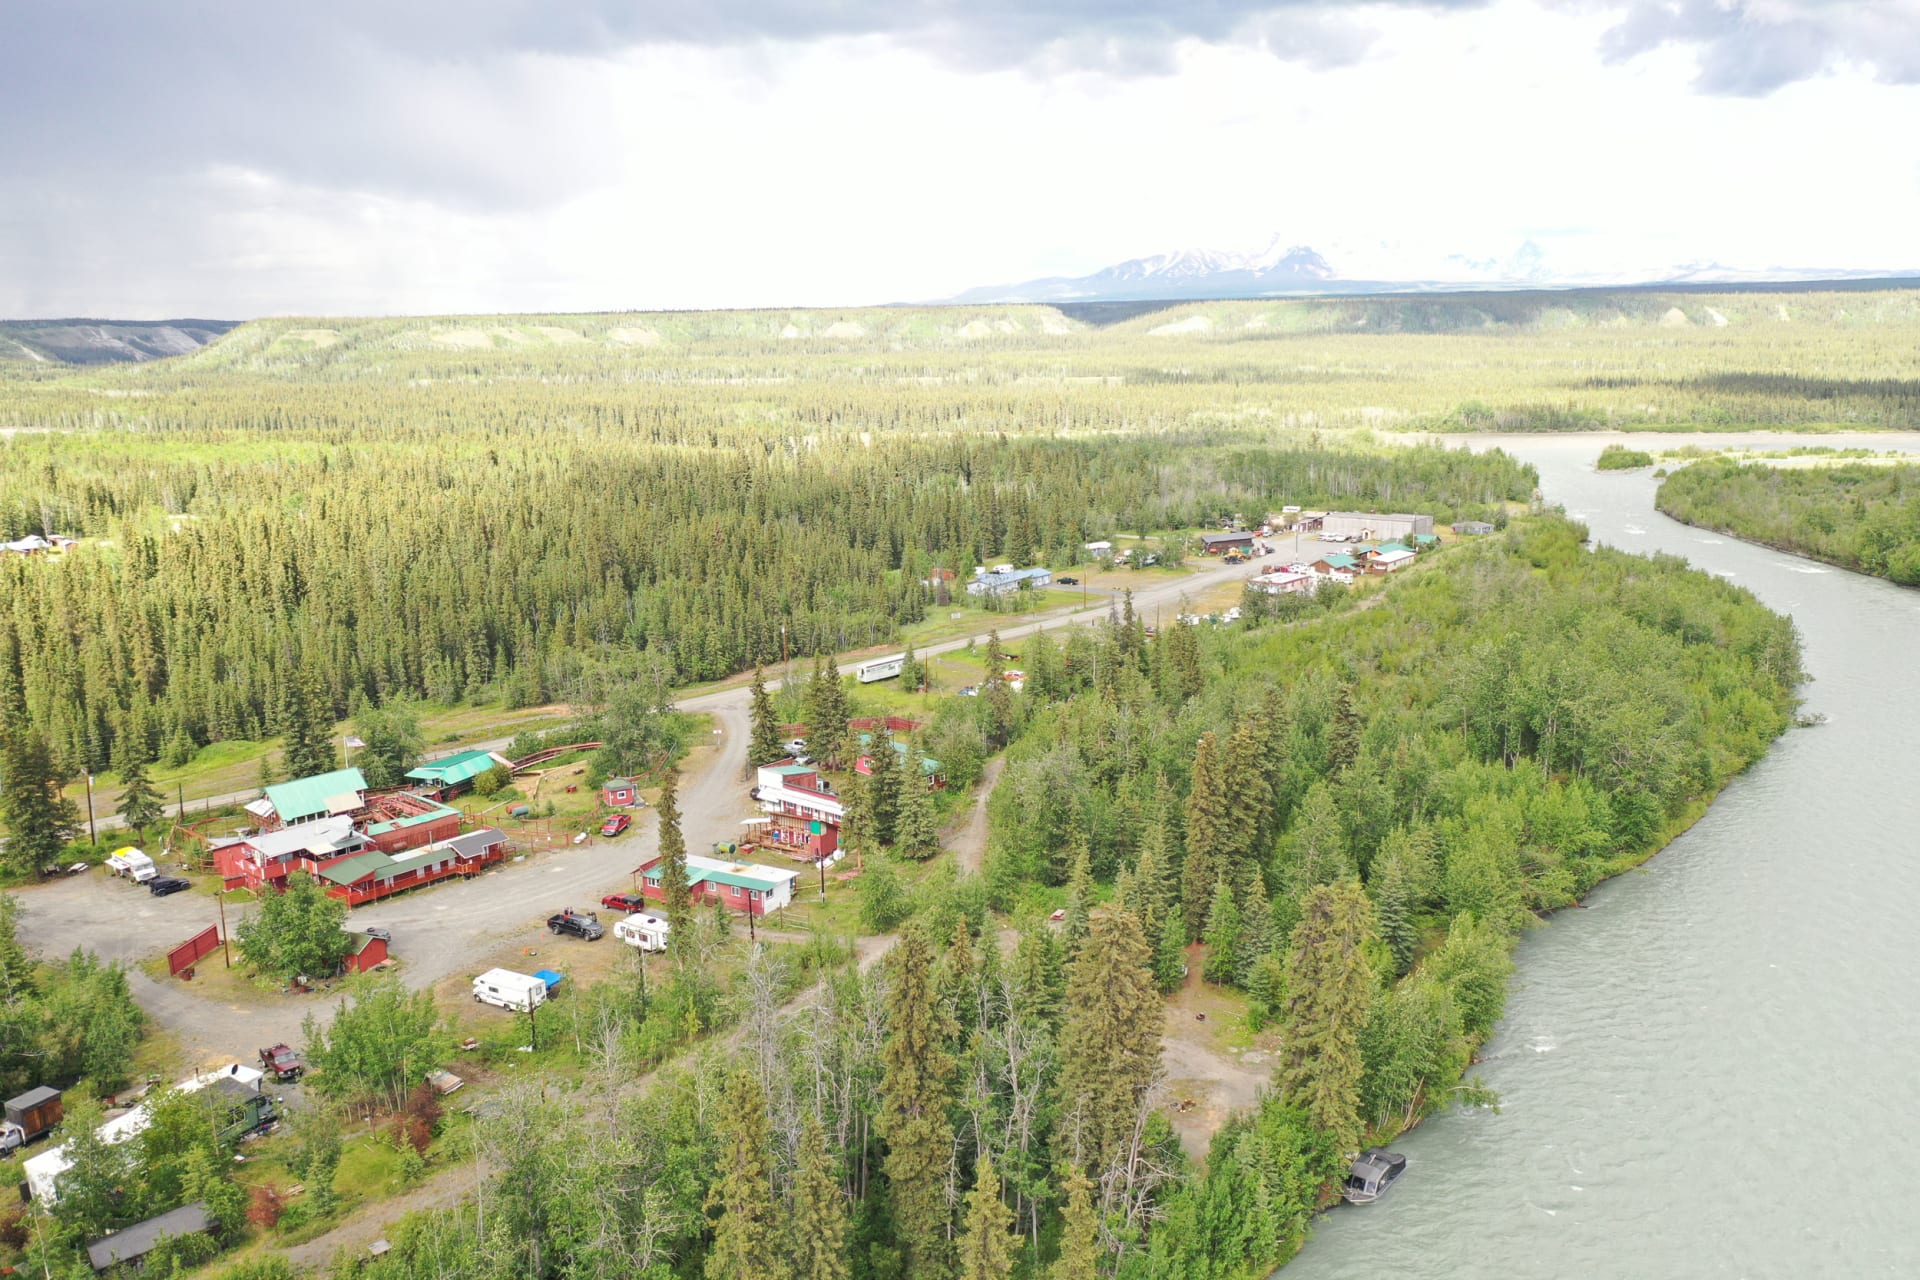 Aerial view of Uncle Nic's on the Klutina. Here you have another view of the tour boat seen in previous pix, as well as much of the camping & lodging property. Klutina confluence with Copper River in the distance. 